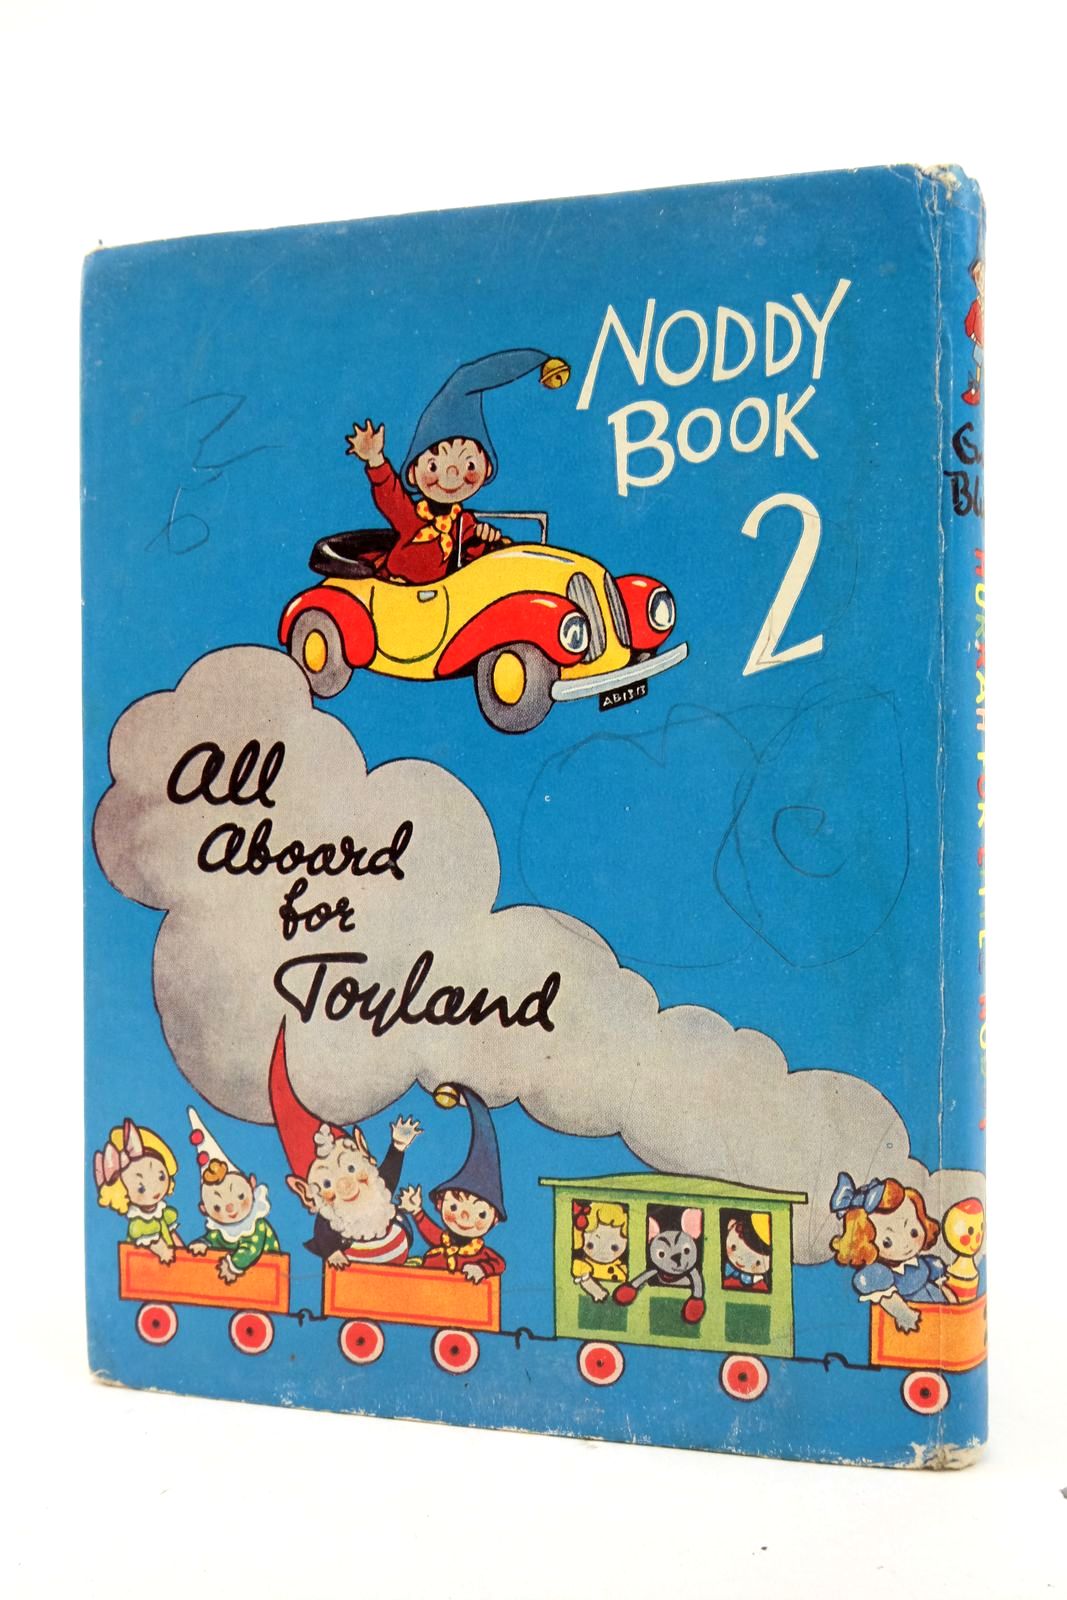 Photo of HURRAH FOR LITTLE NODDY written by Blyton, Enid illustrated by Beek,  published by Sampson Low, Marston & Co. Ltd. (STOCK CODE: 2137494)  for sale by Stella & Rose's Books